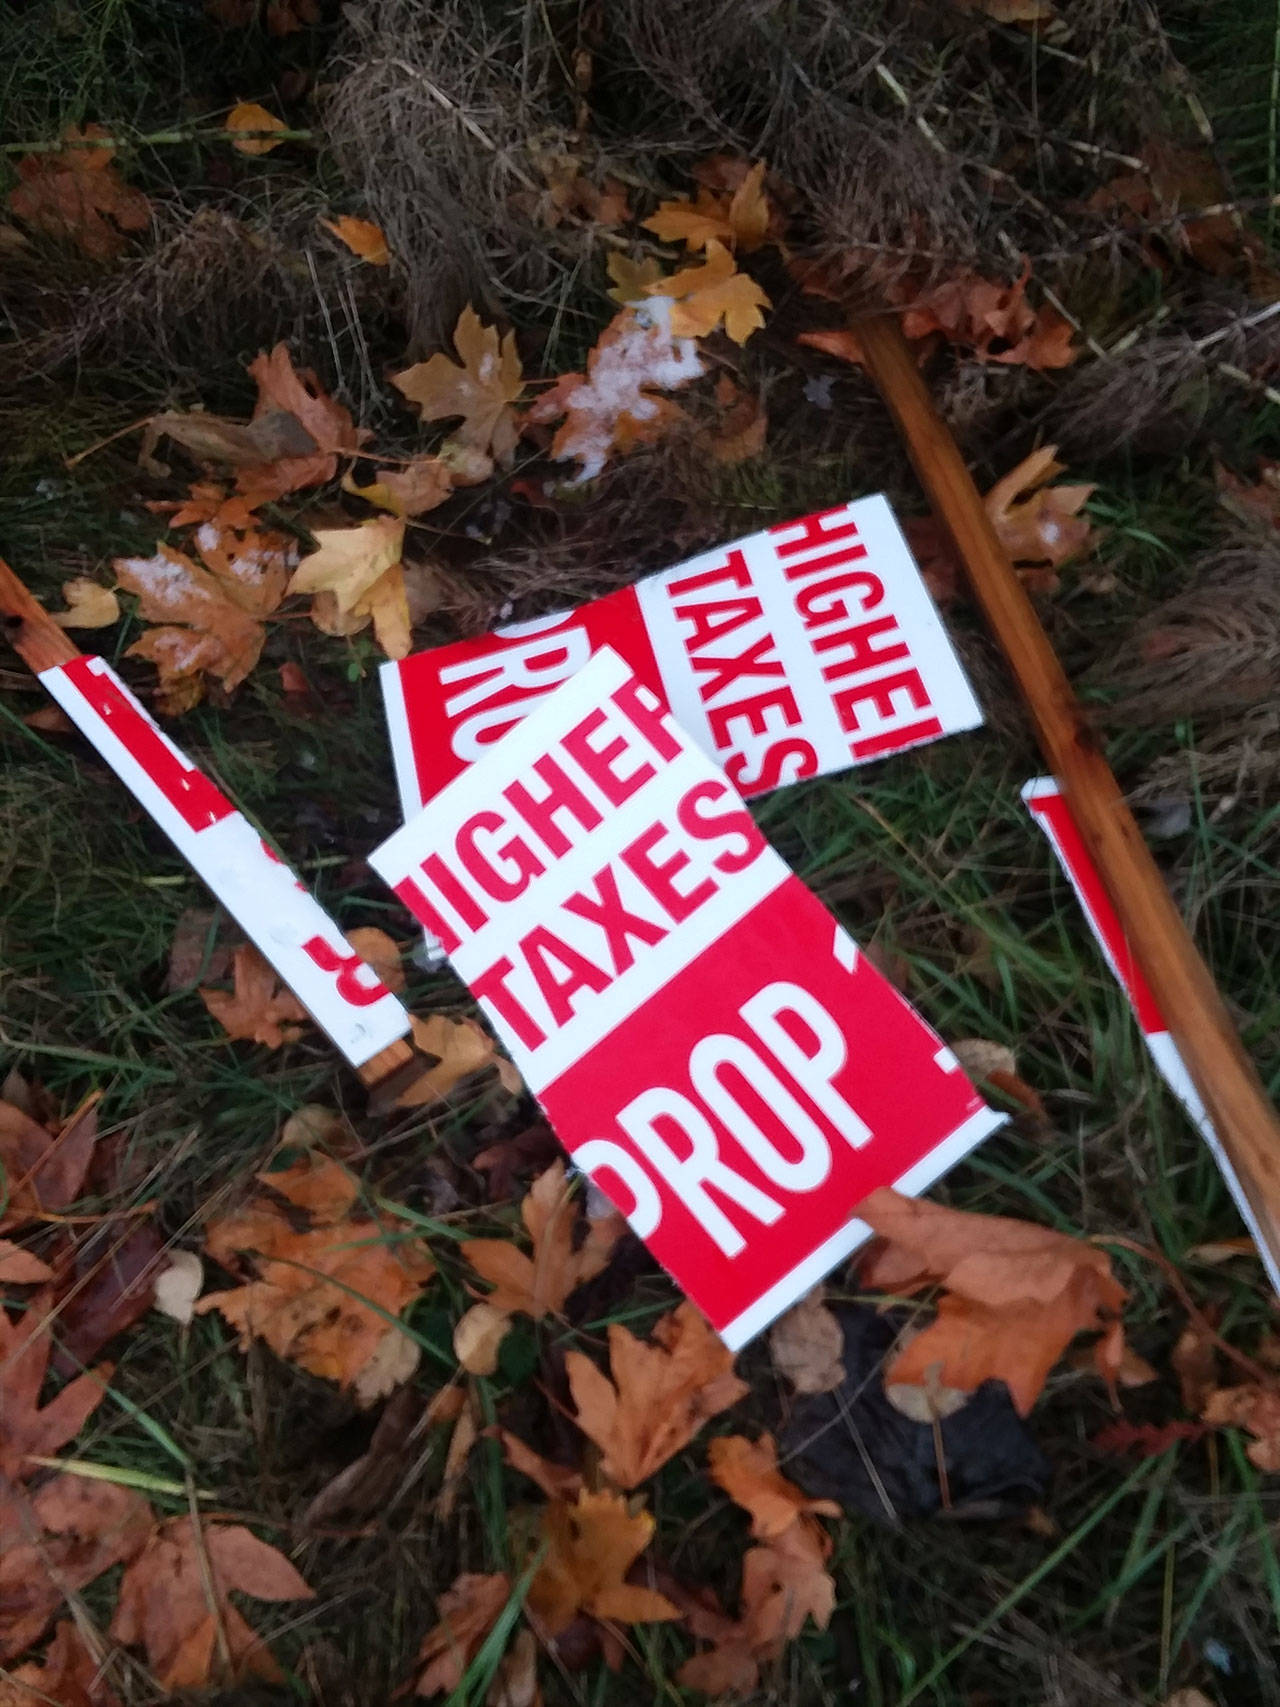 Opponents of Proposition 1 in Jefferson County say vandals have been destroying or defacing their anti-Proposition 1 signs throughout the election season.